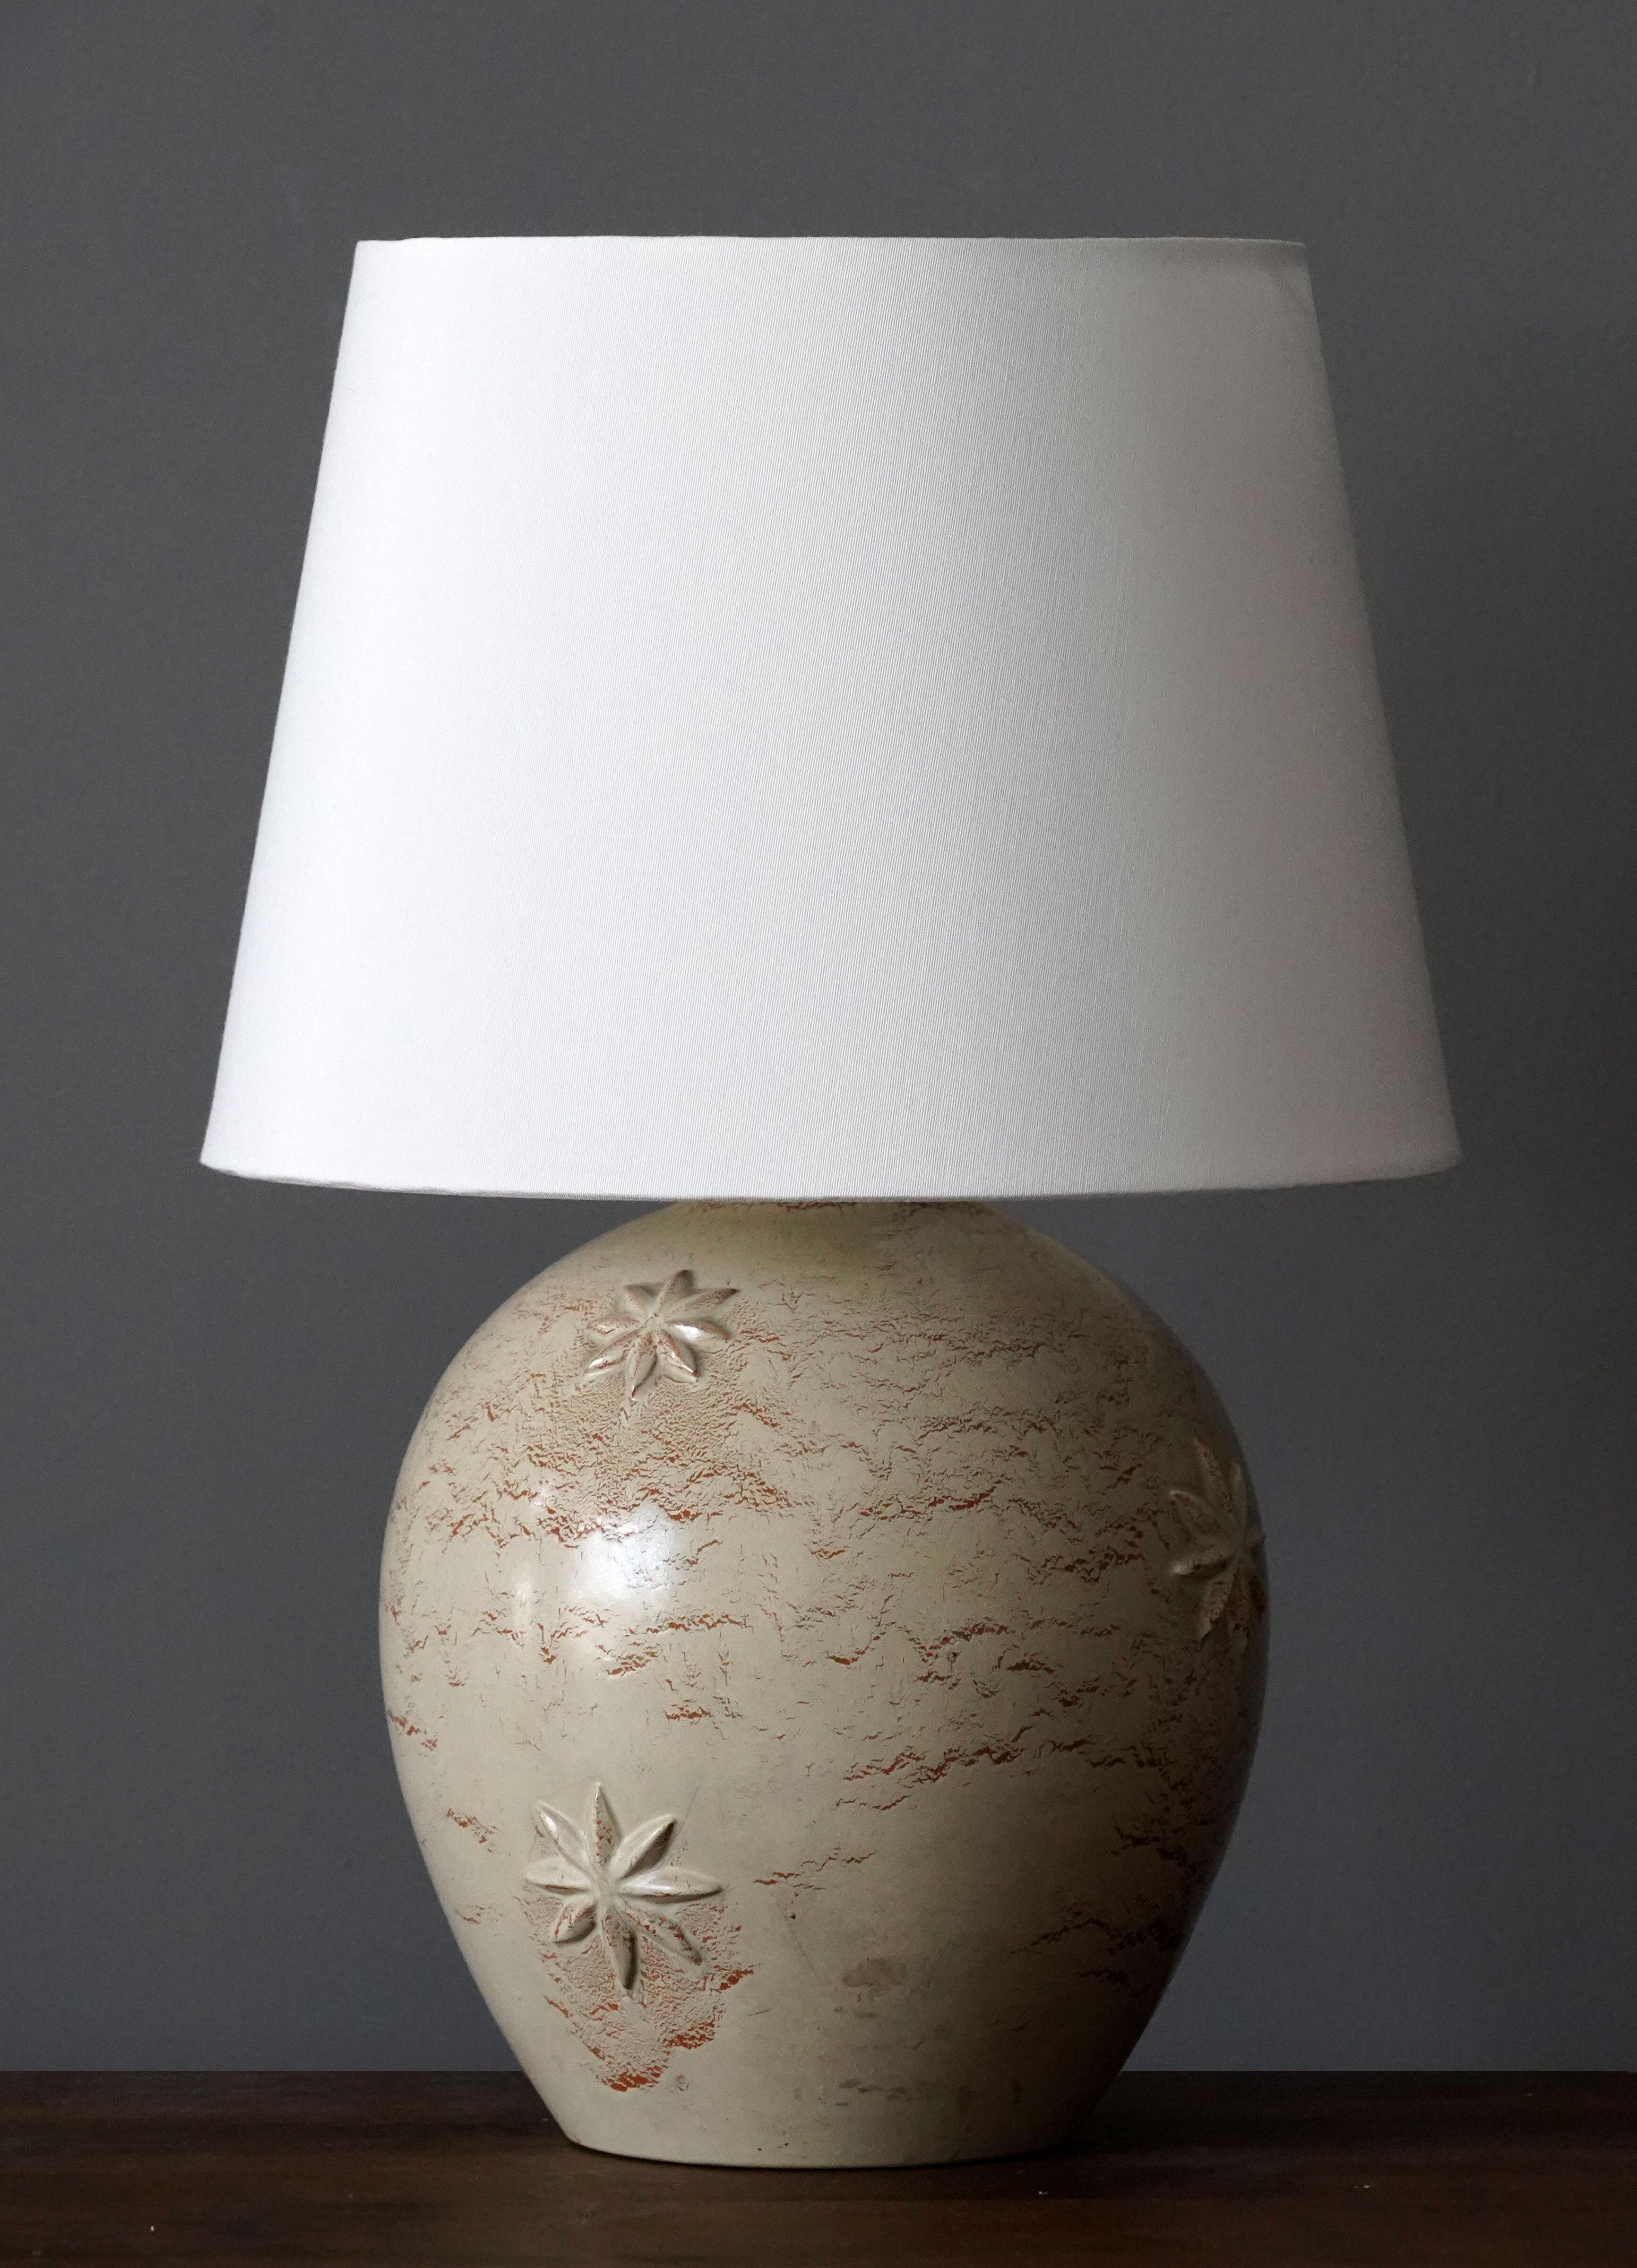 A table lamp designed by Jerk Werkmäster. Produced by Nittsjö, Sweden, 1950s. Stamped.

Sold without lampshade. Stated measurements exclude lampshade.

Glaze features brown-beige-grey colors.

Other designers of the period include Axel Salto, Paavo